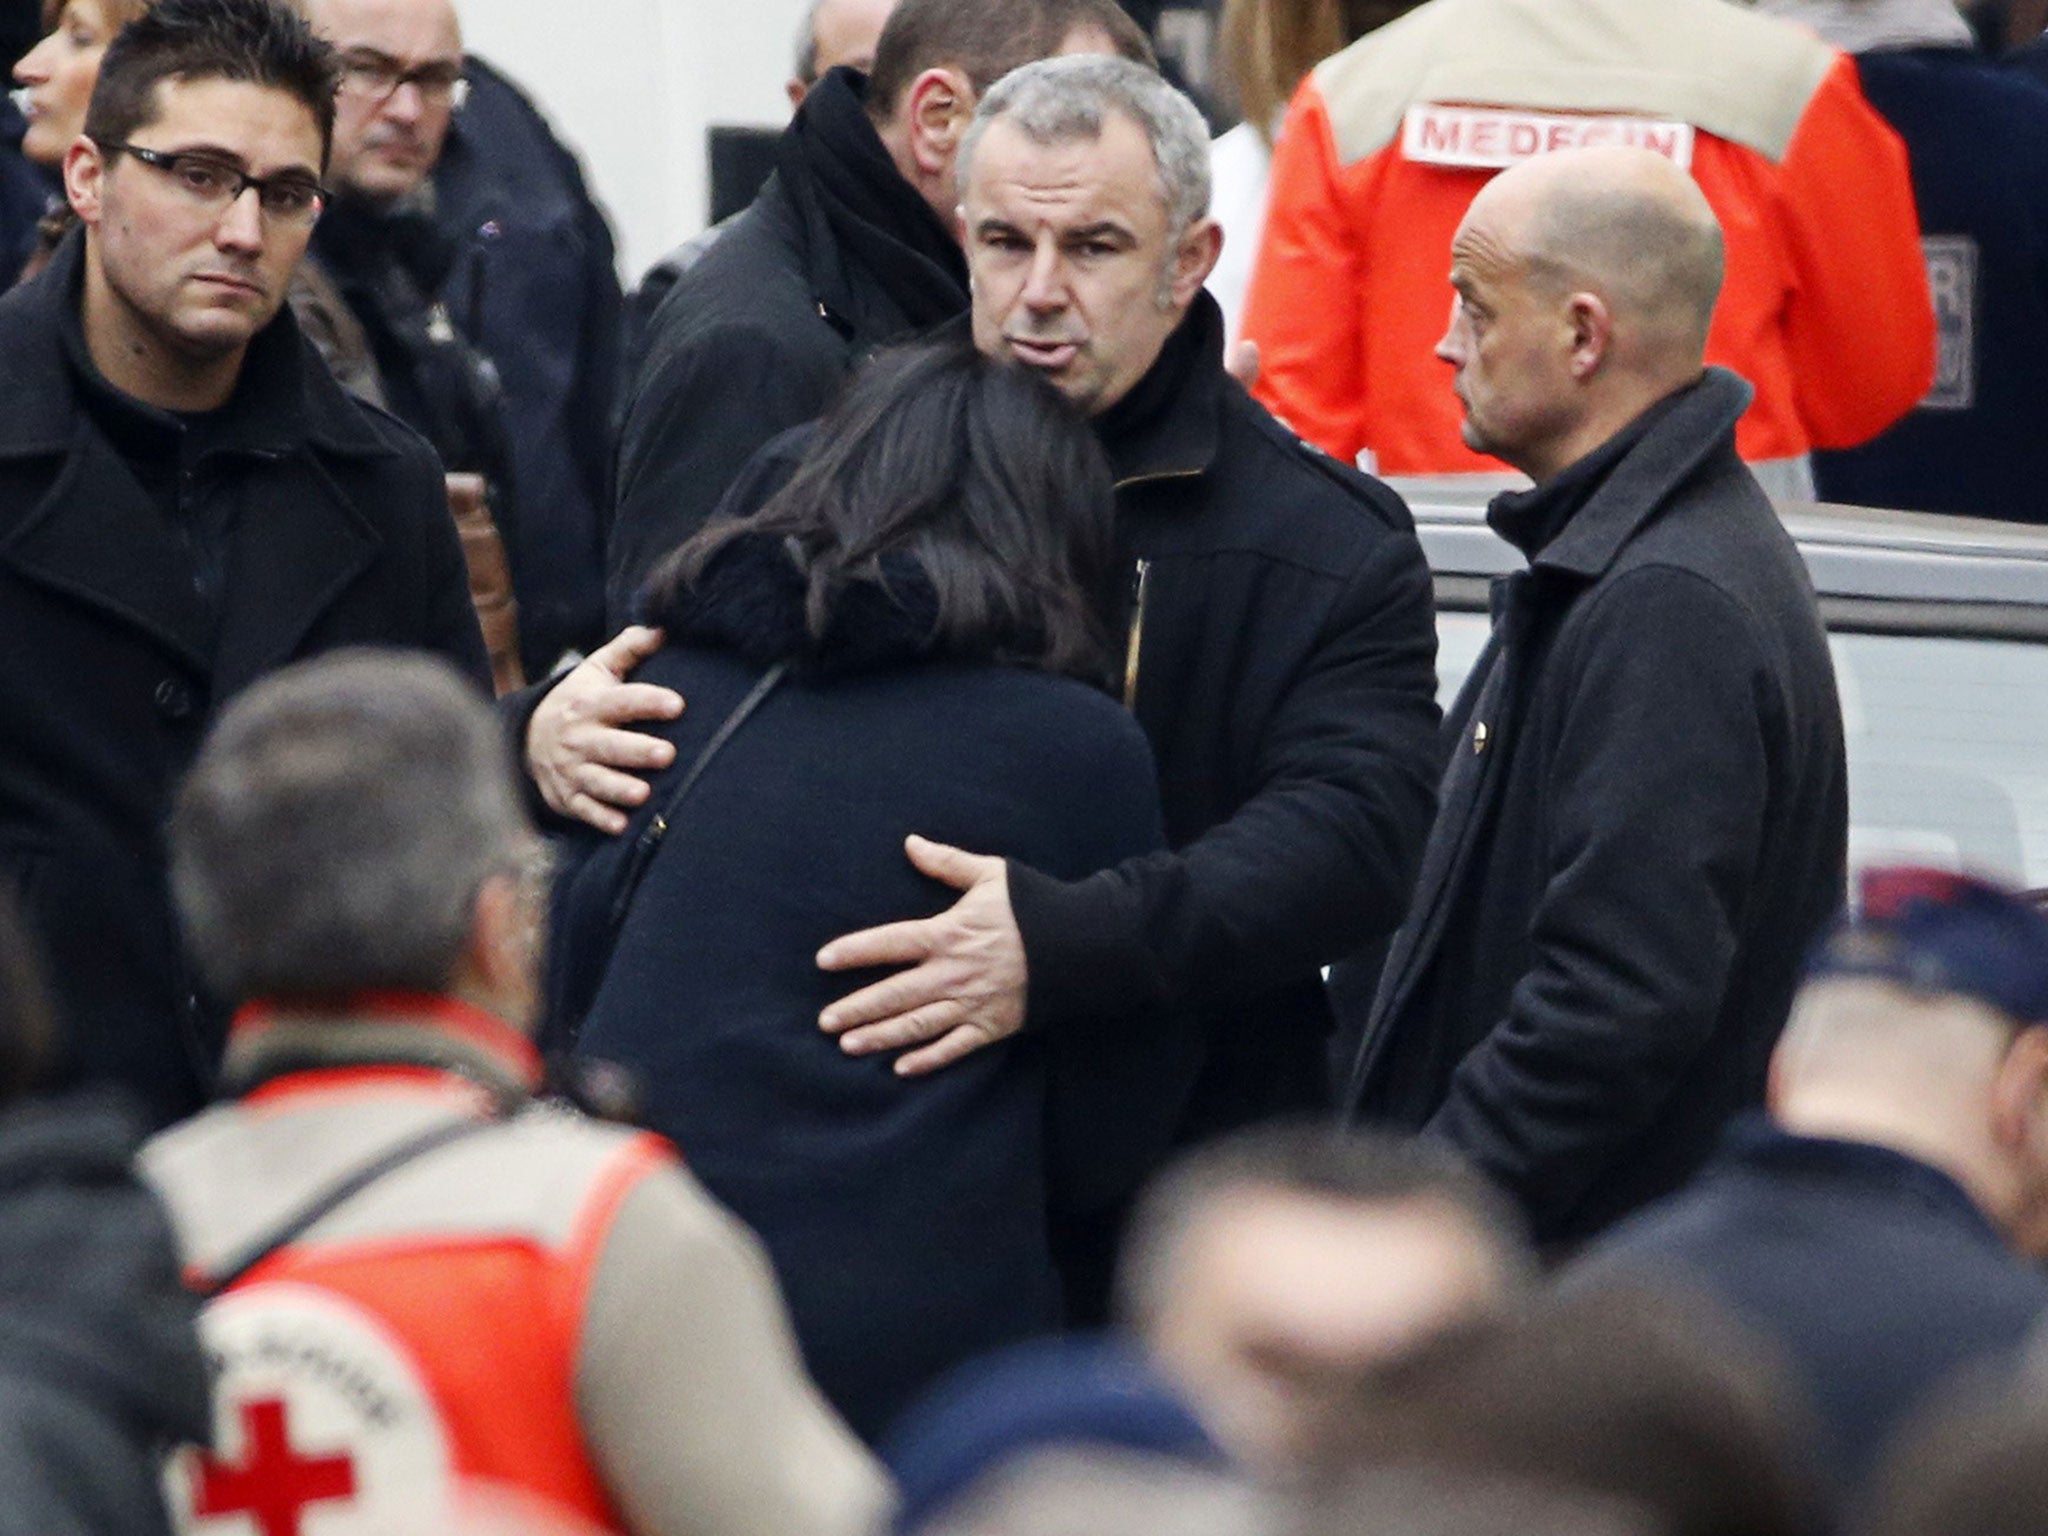 French former Youth and Associations Junior minister Jeannette Bougrab (C) is comforted by an unidentified person outside of the headquarters of the French satirical newspaper Charlie Hebdo in Paris